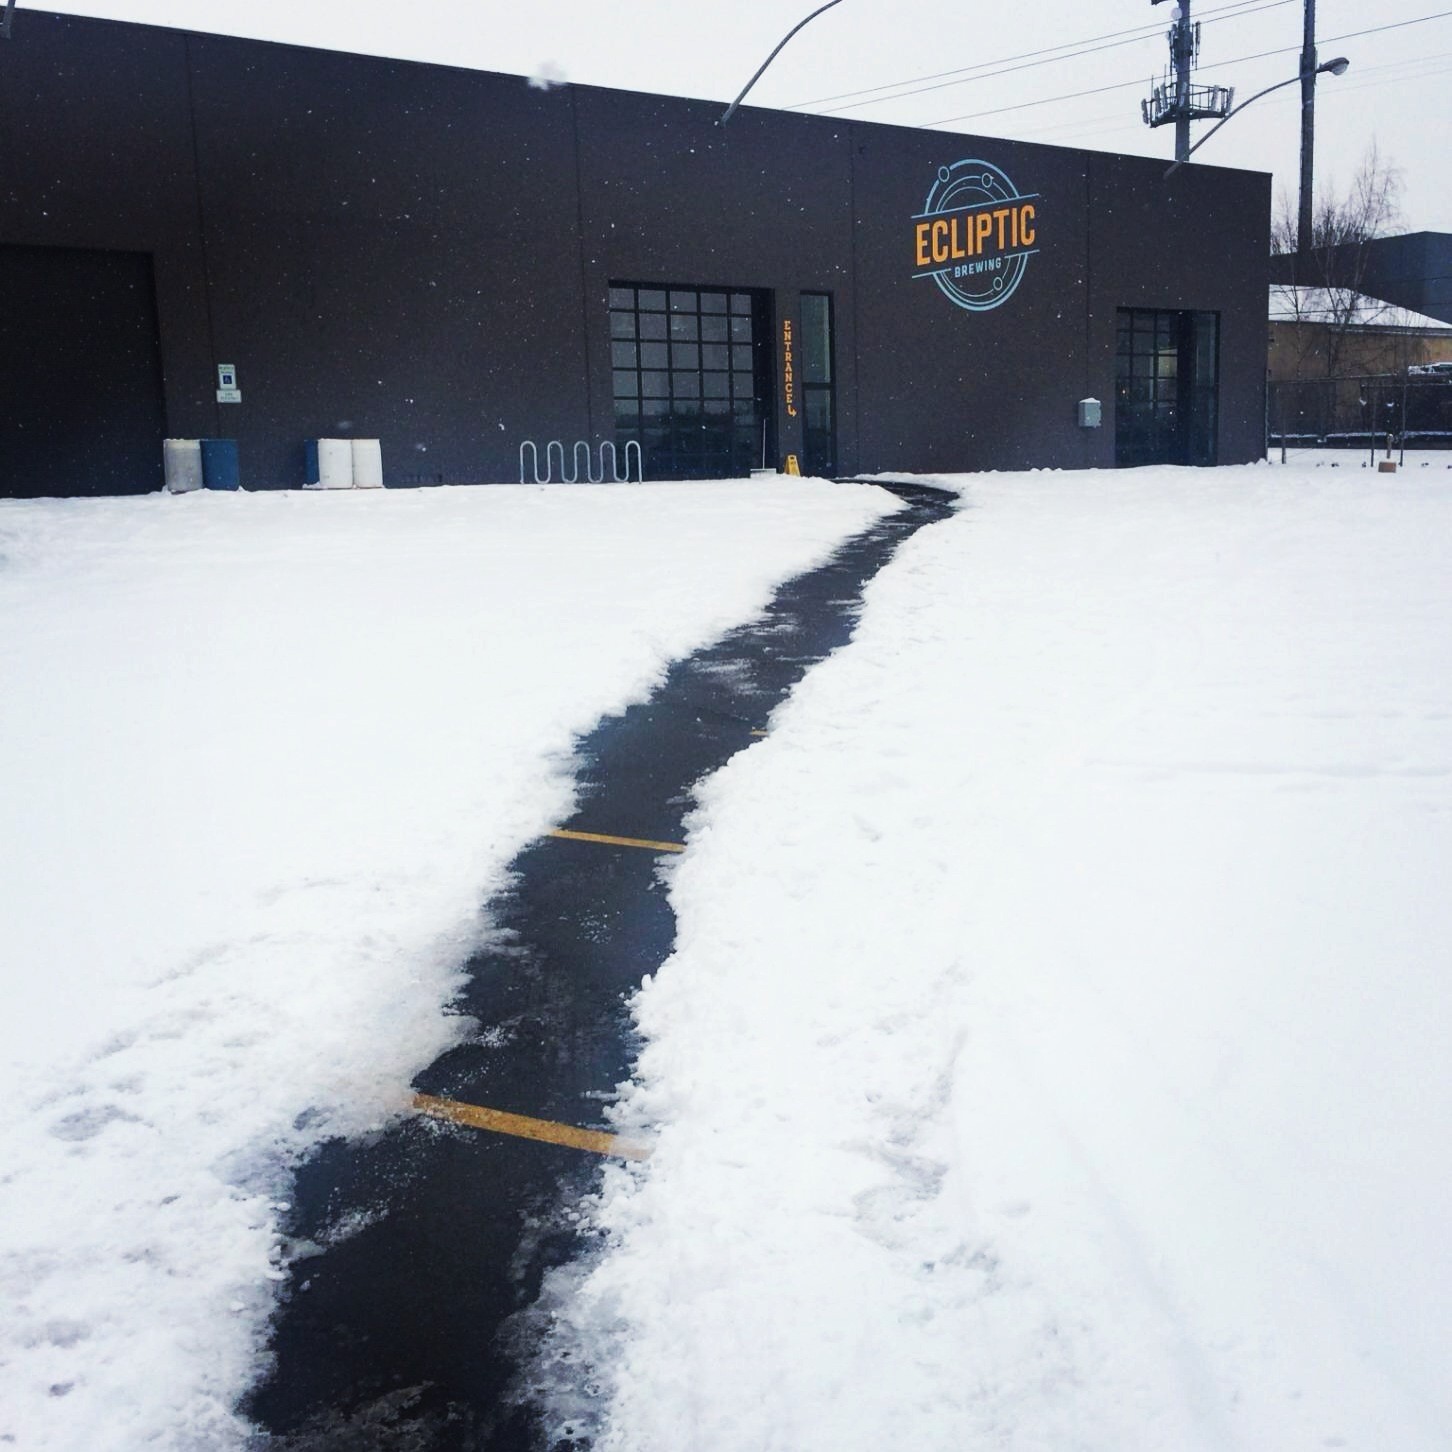 Path Through Snow To Ecliptic Brewing Entrance The Gallery